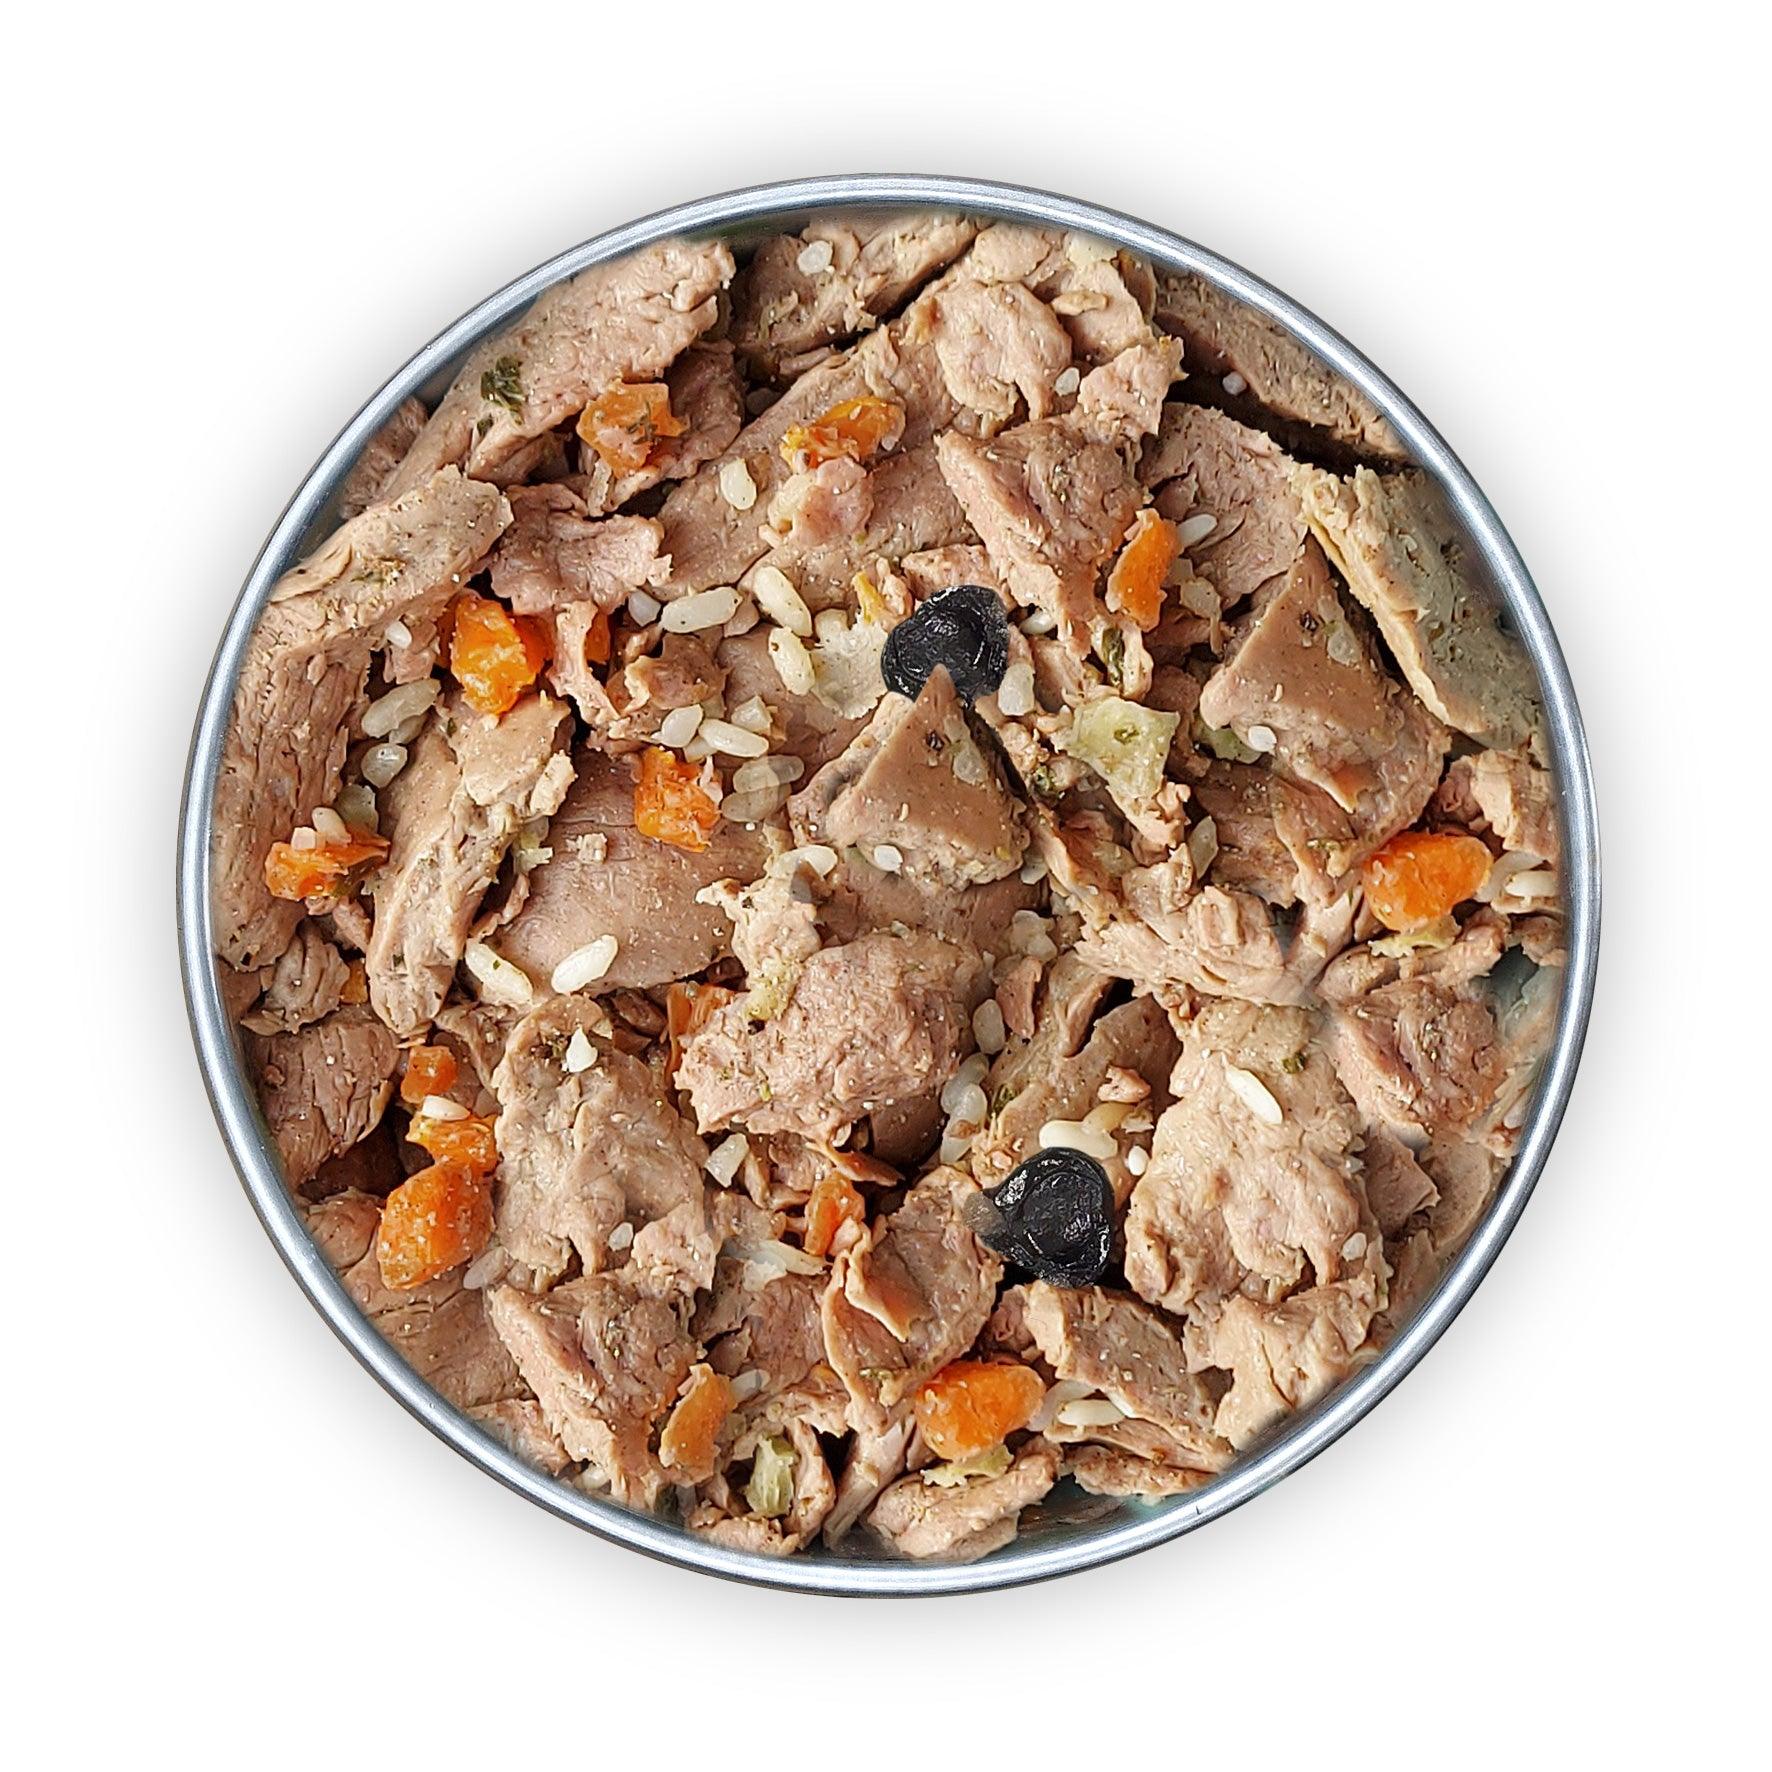 Cooked Fresh Rabbit Menu with Rice, Carrot and Cranberries (500g)